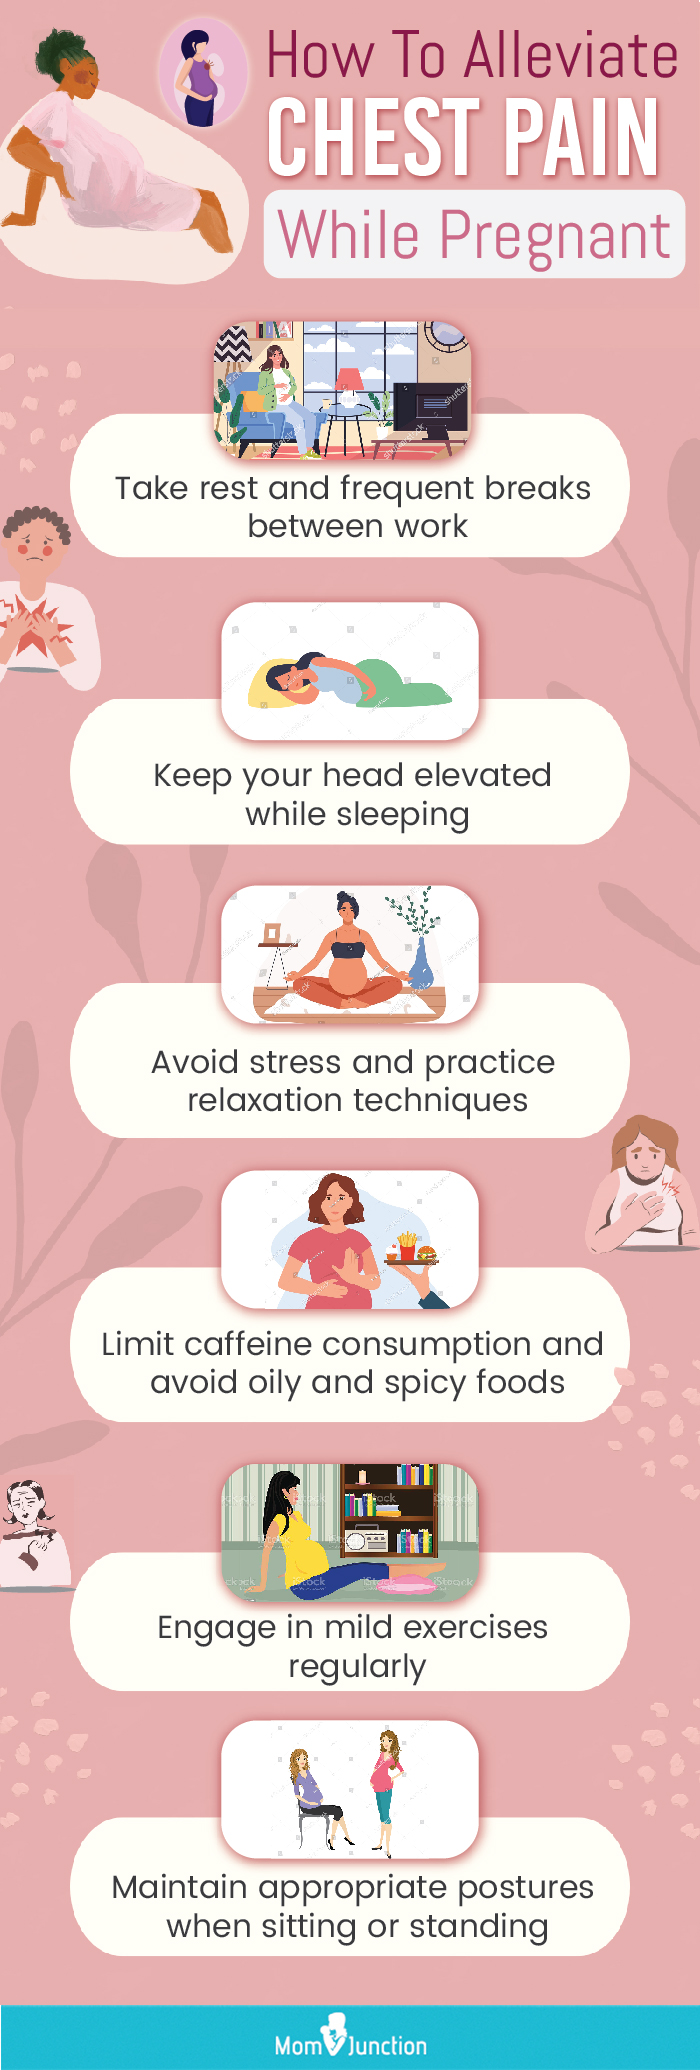 tips to get relief from chest pain during pregnancy (infographic)